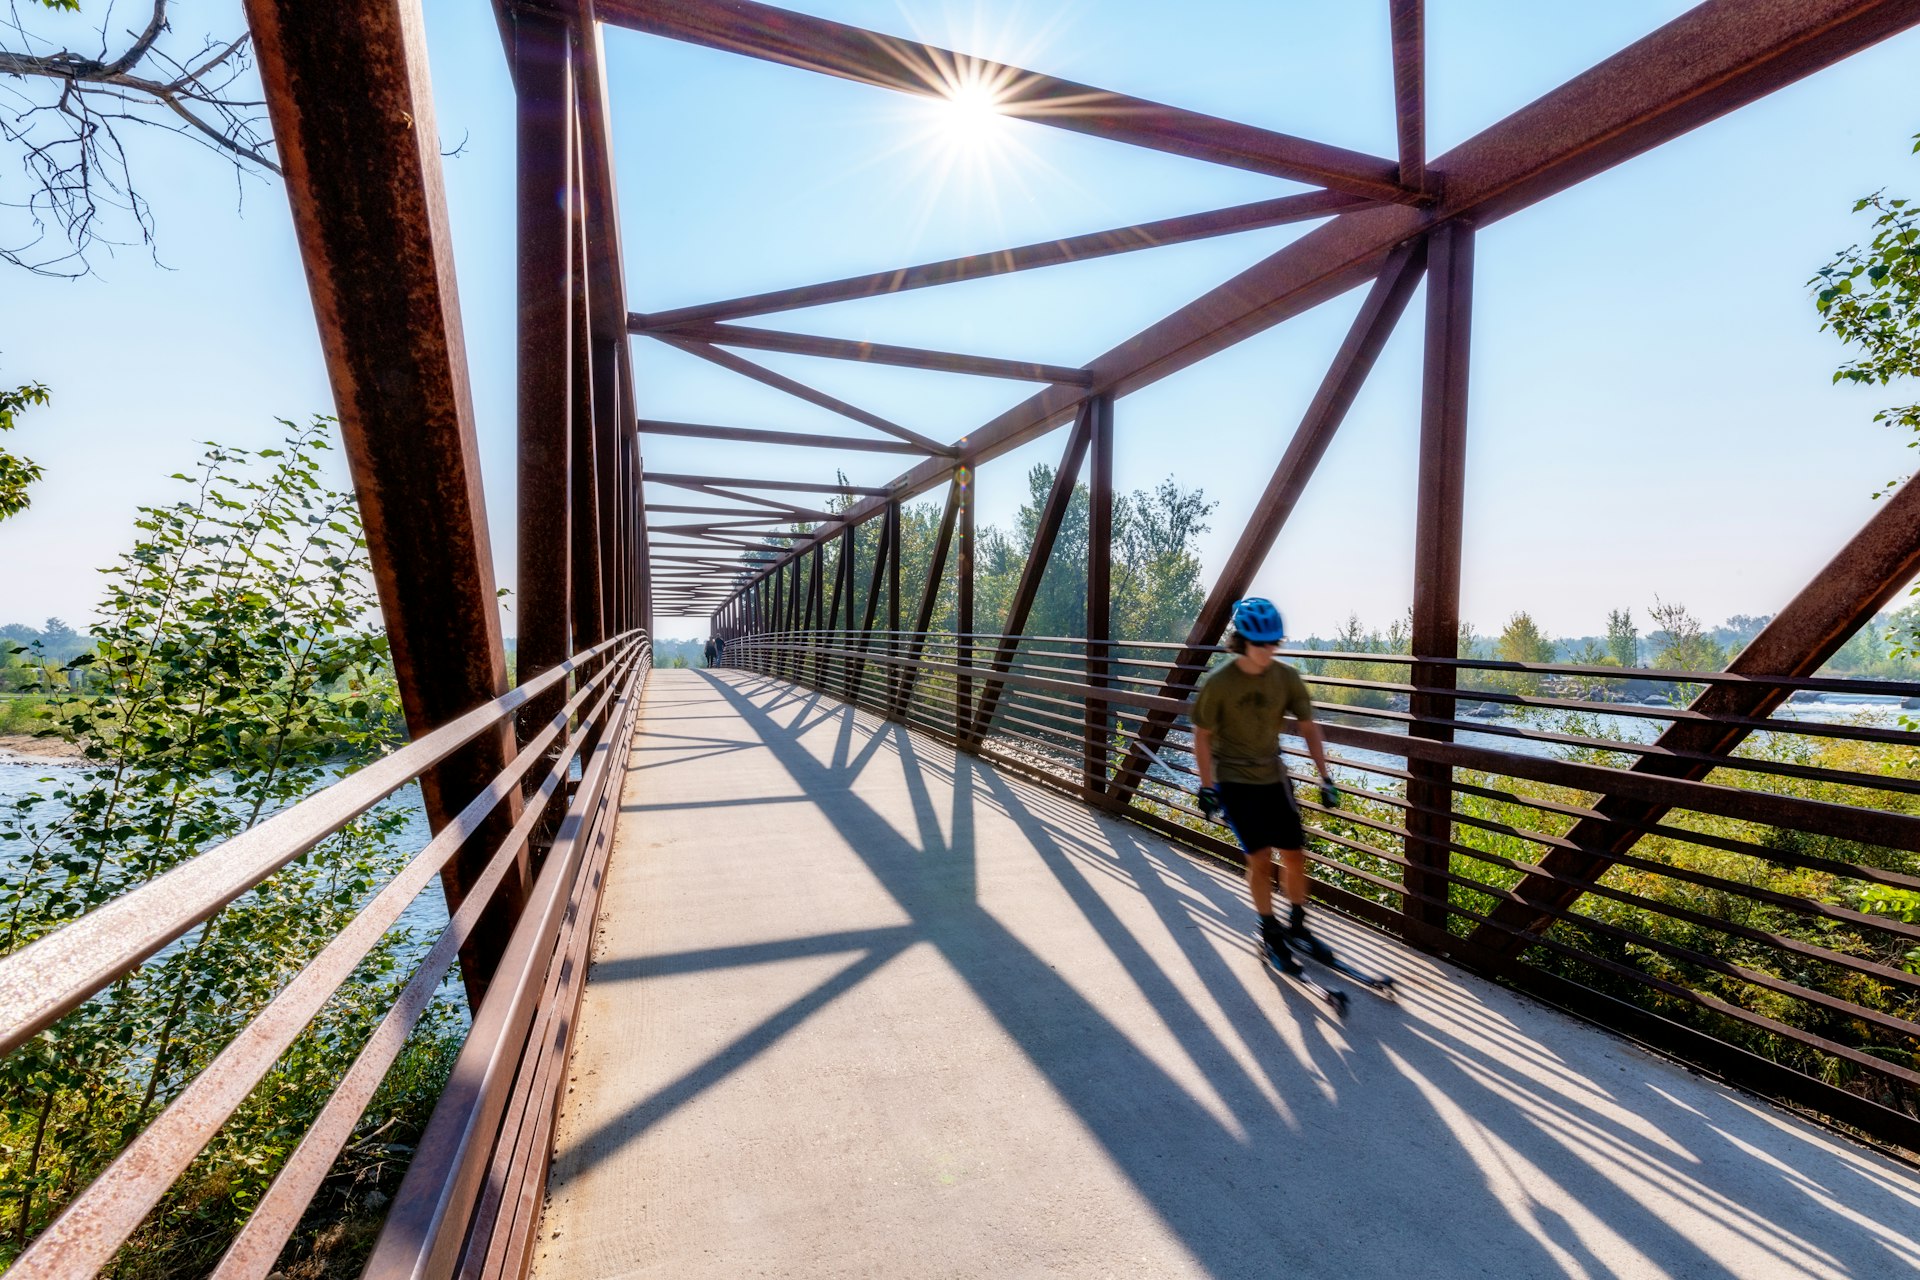 Boise river bridge with a skater on the move